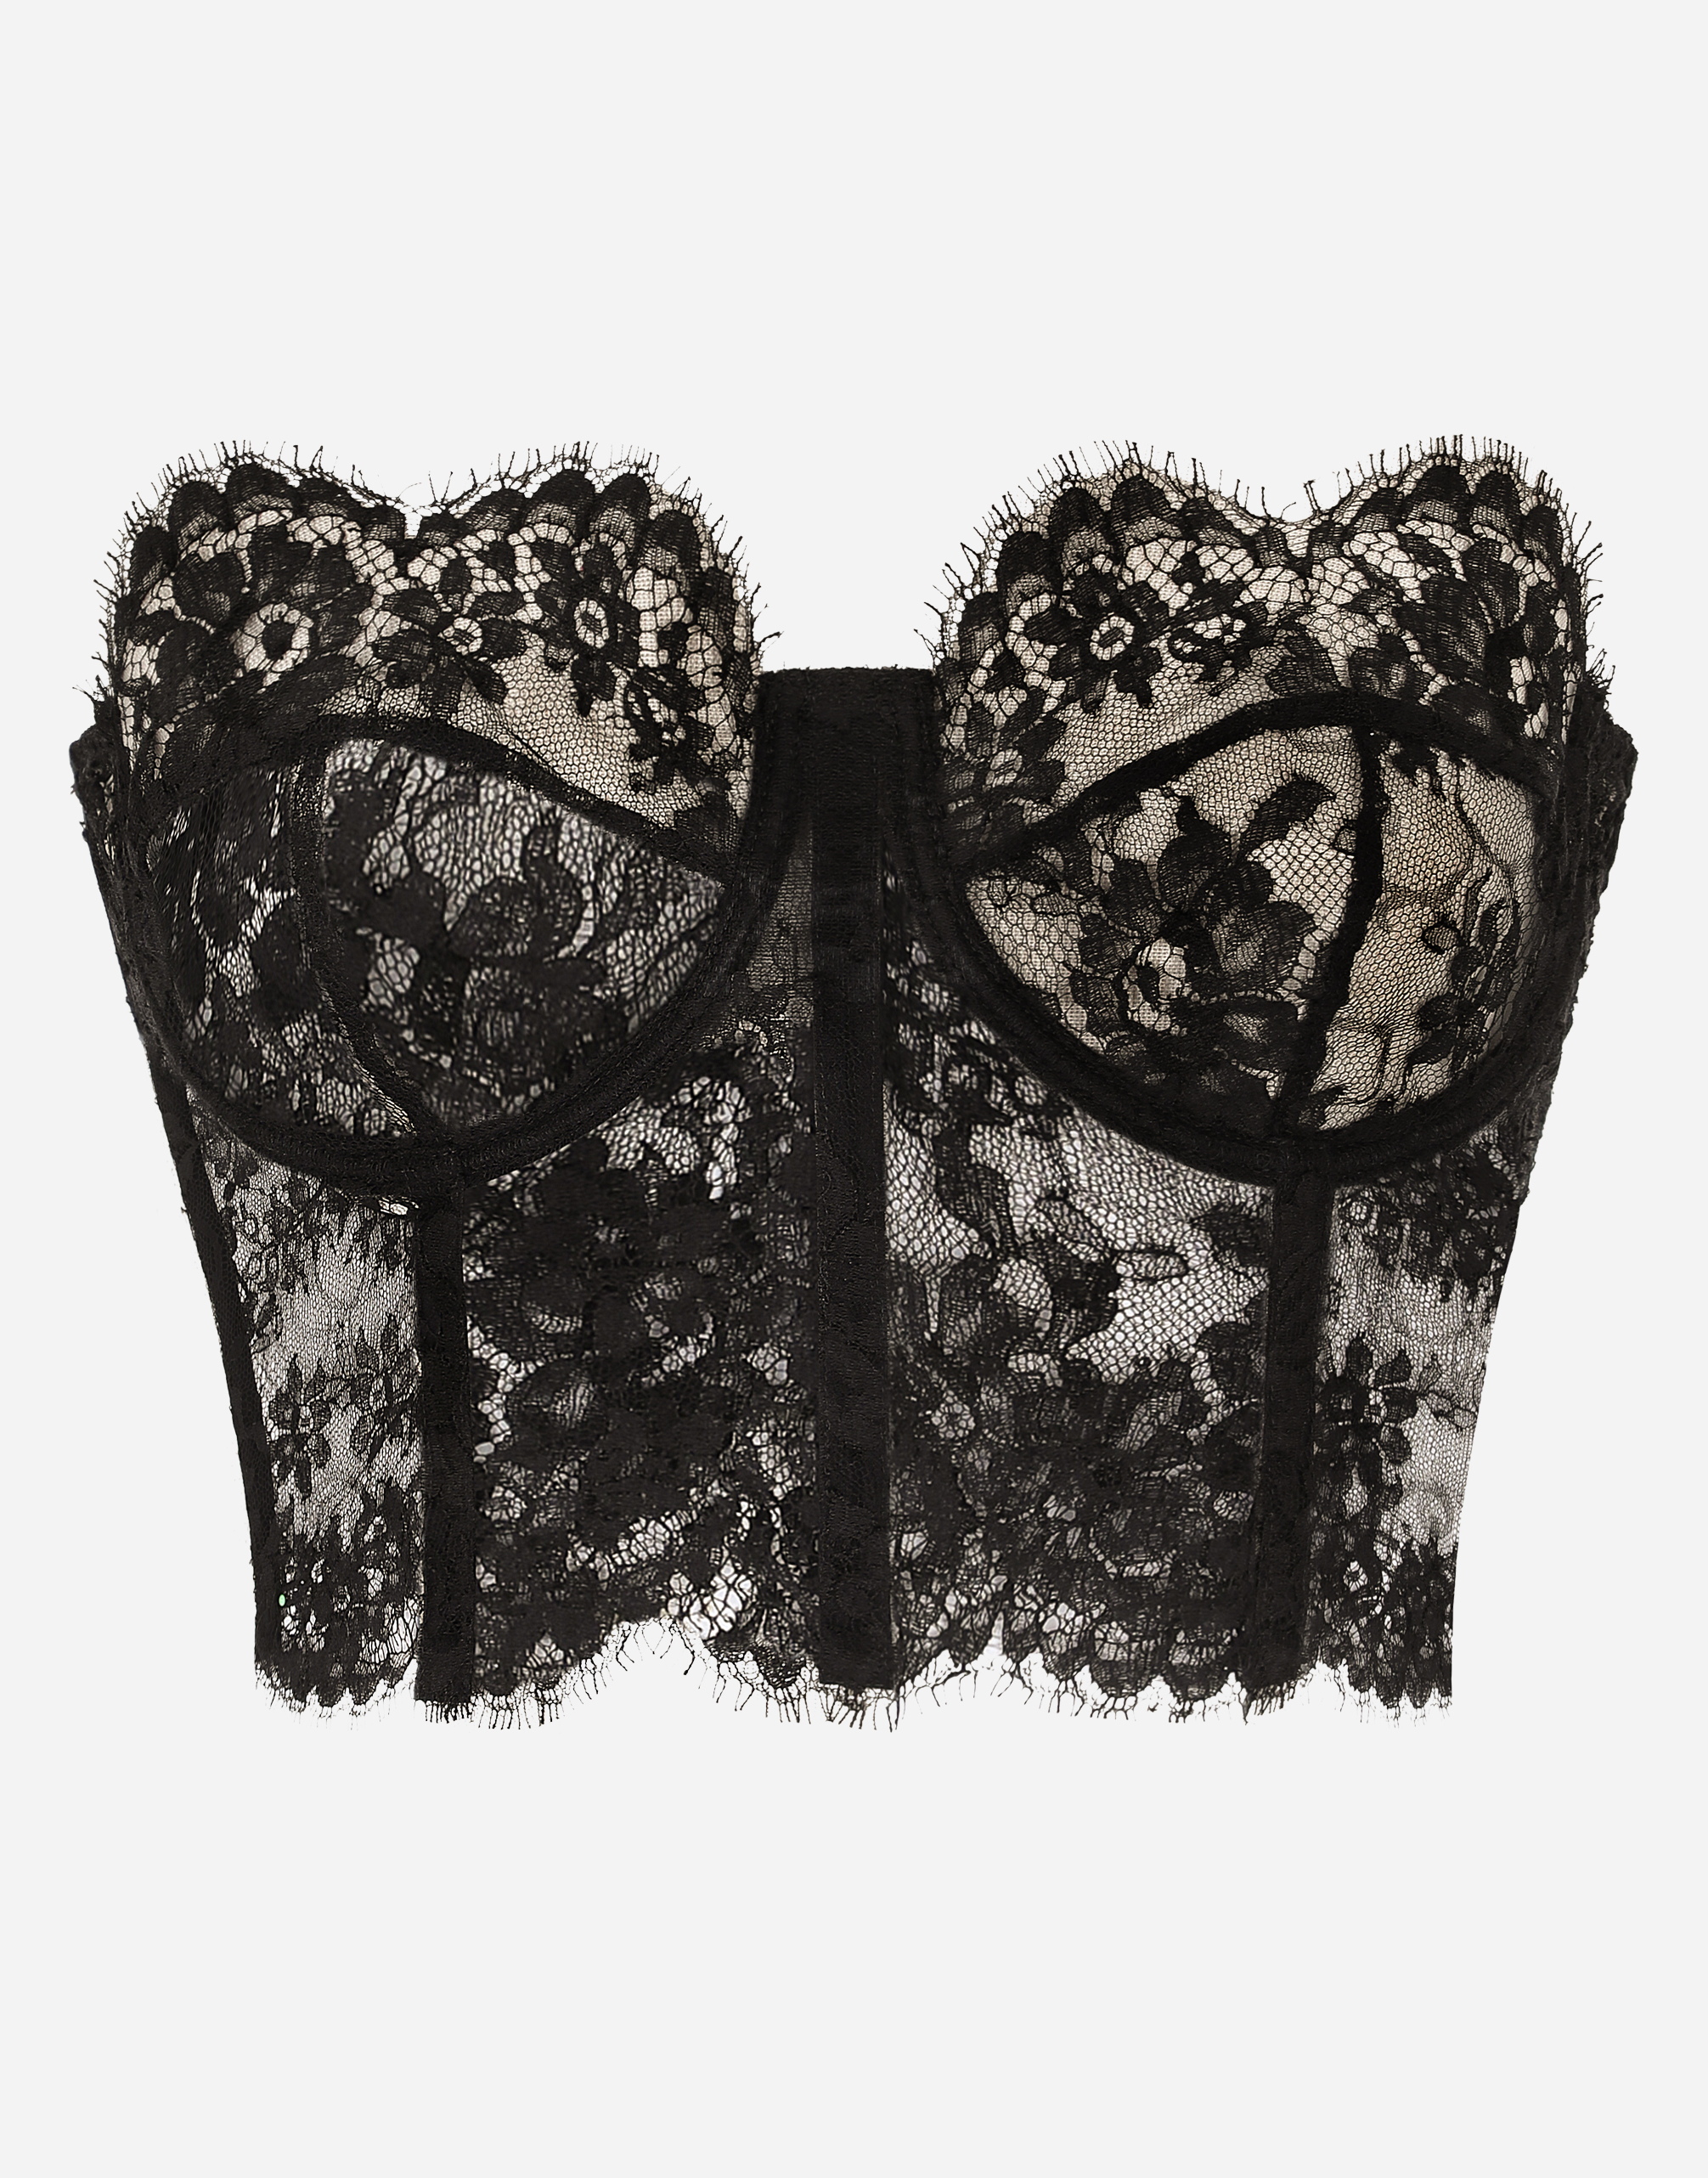 Lace bustier top in Black